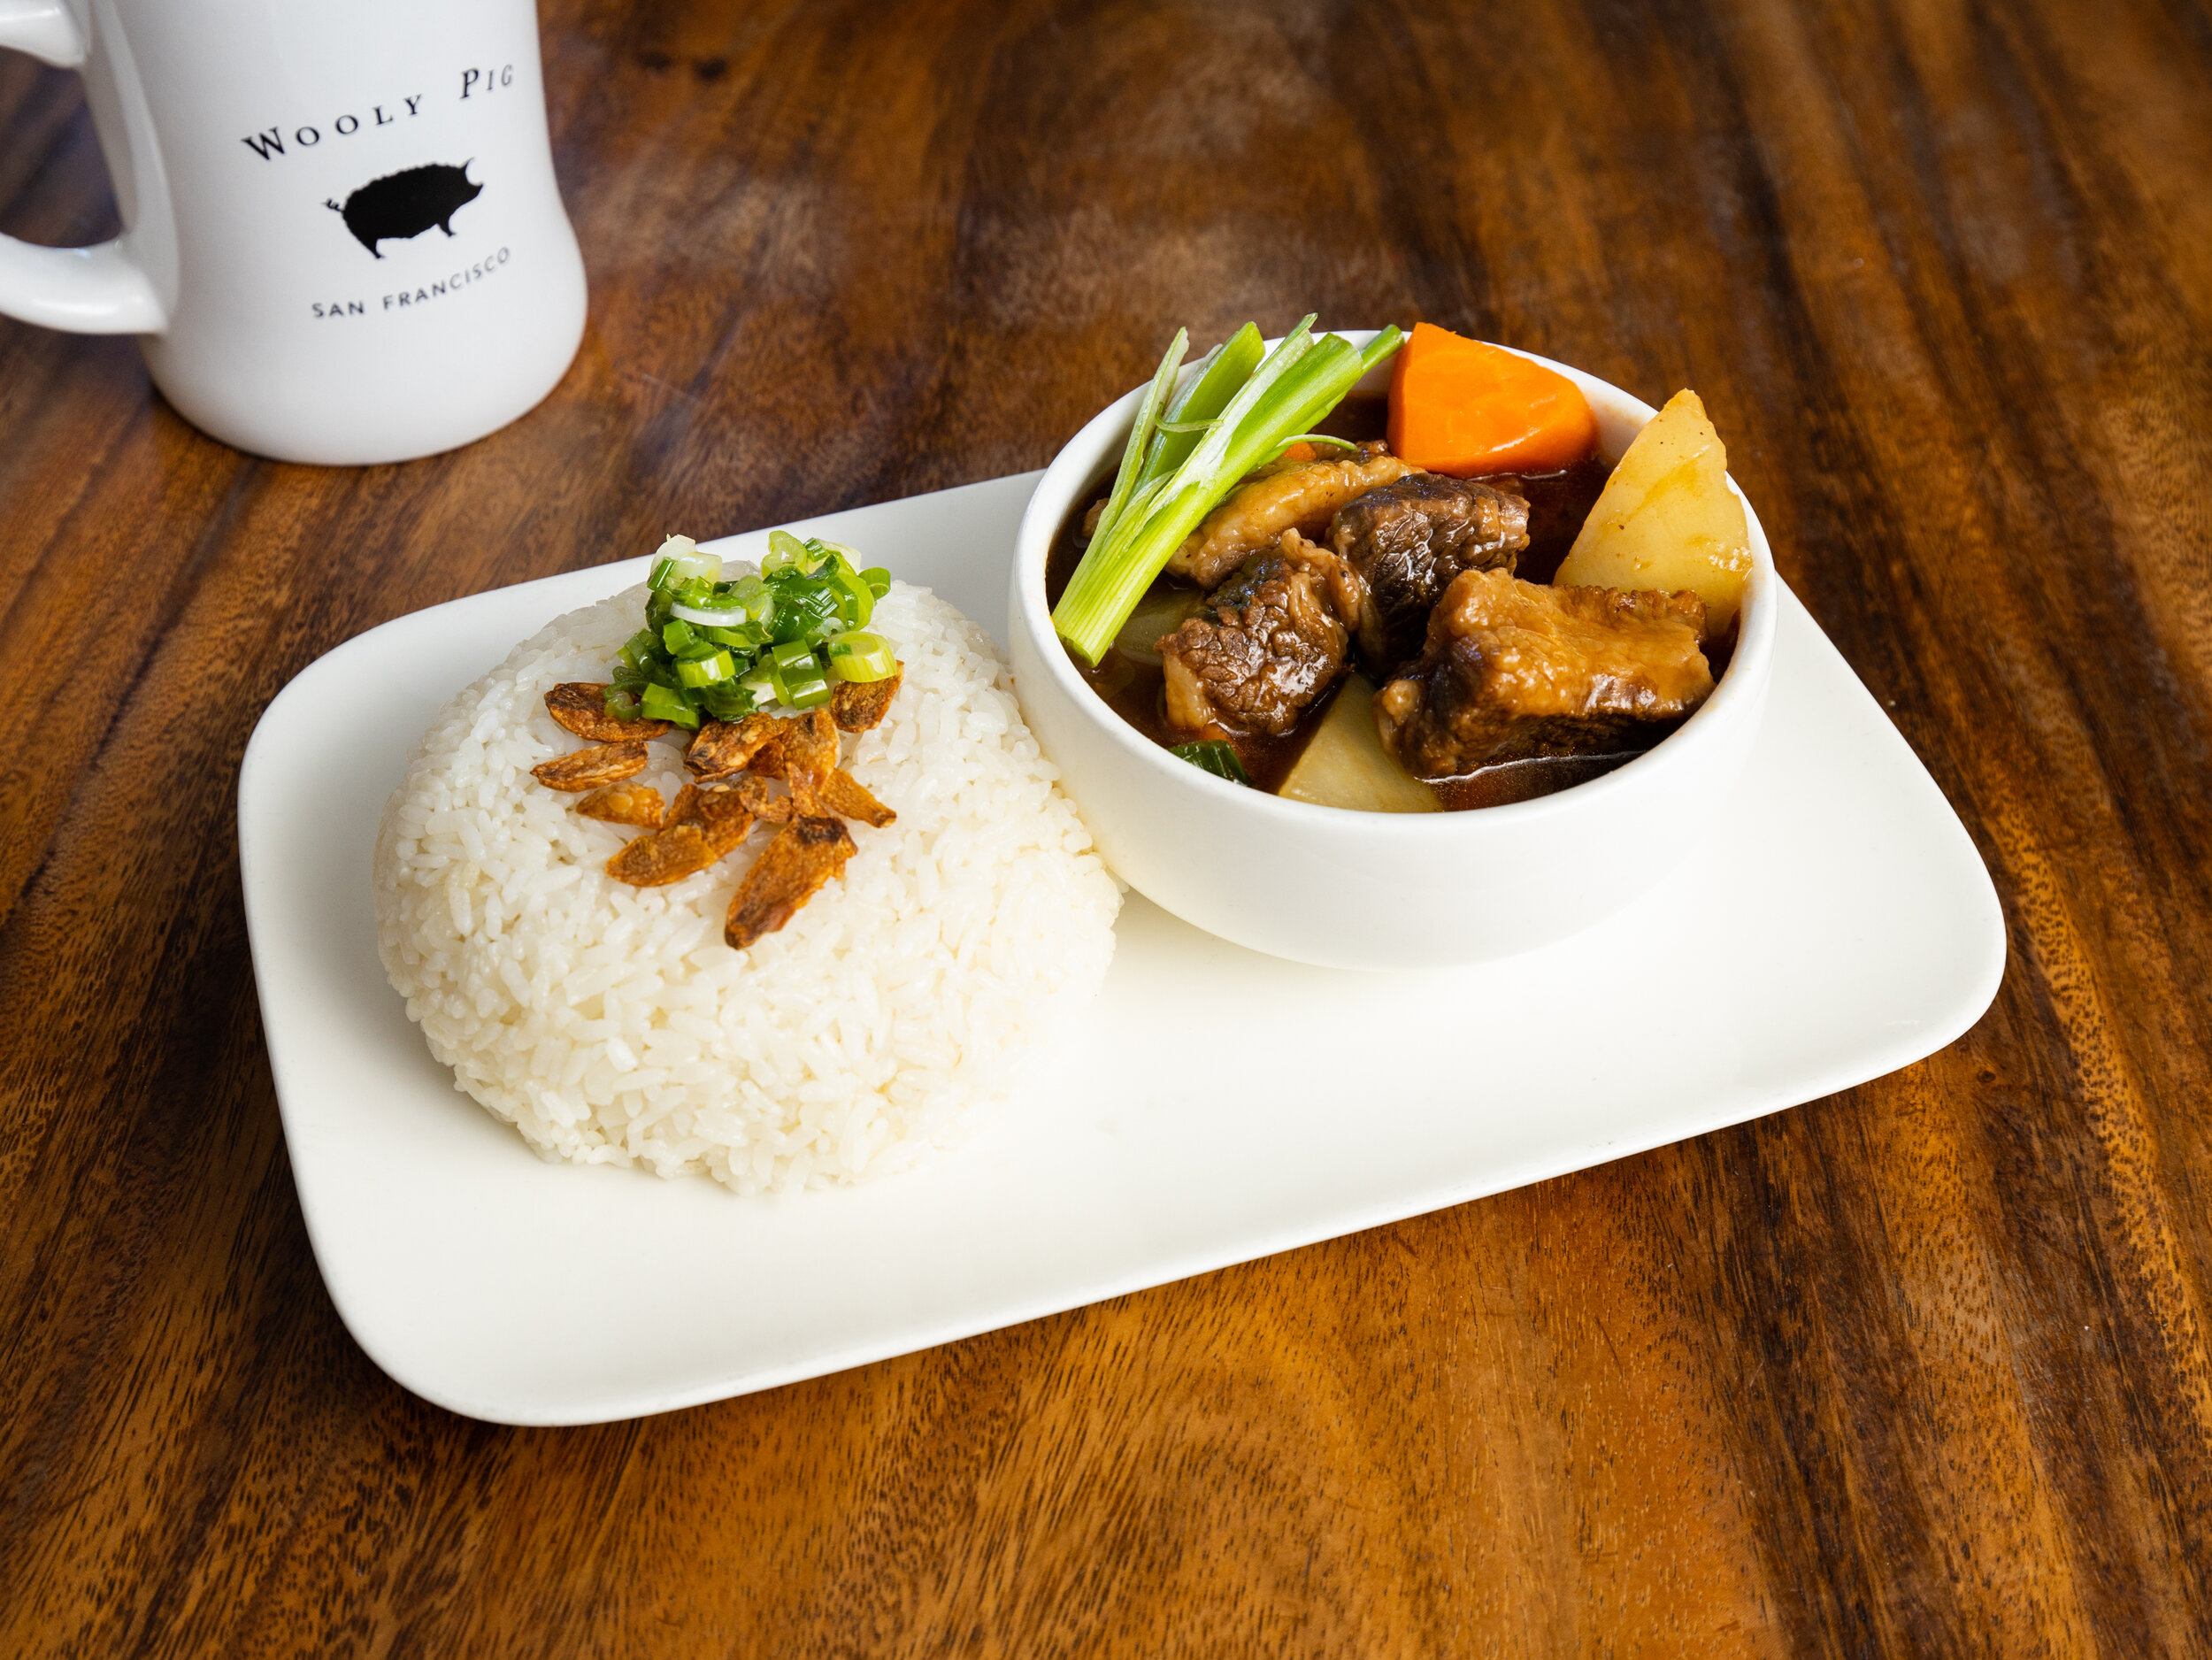 WoolyPig_Beef Stew and Rice.jpg